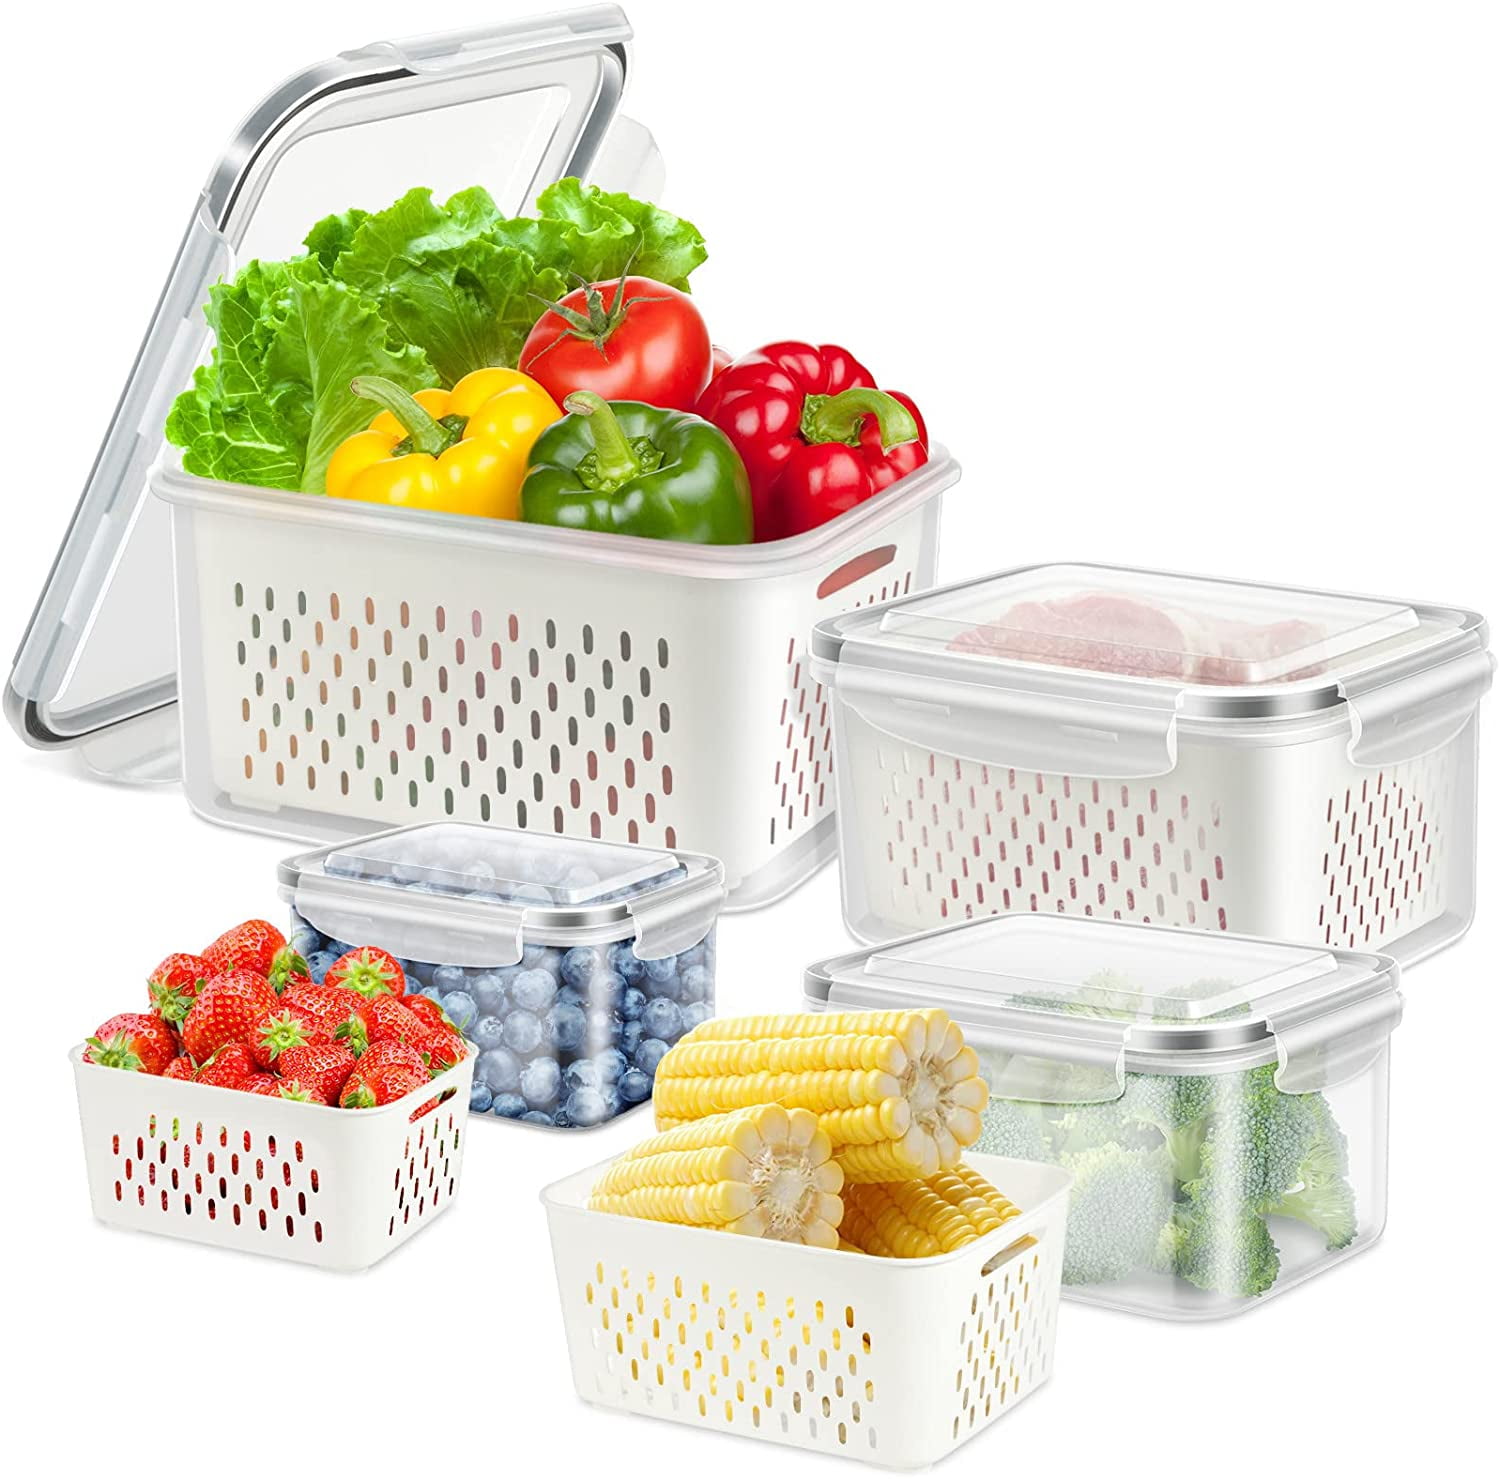 Dengmore Clearance Fruit Vegetable Storage Containers for Fridge Draining Fresh Containers 3 in 1 Produce Storage Containers Large Organizer Bins with